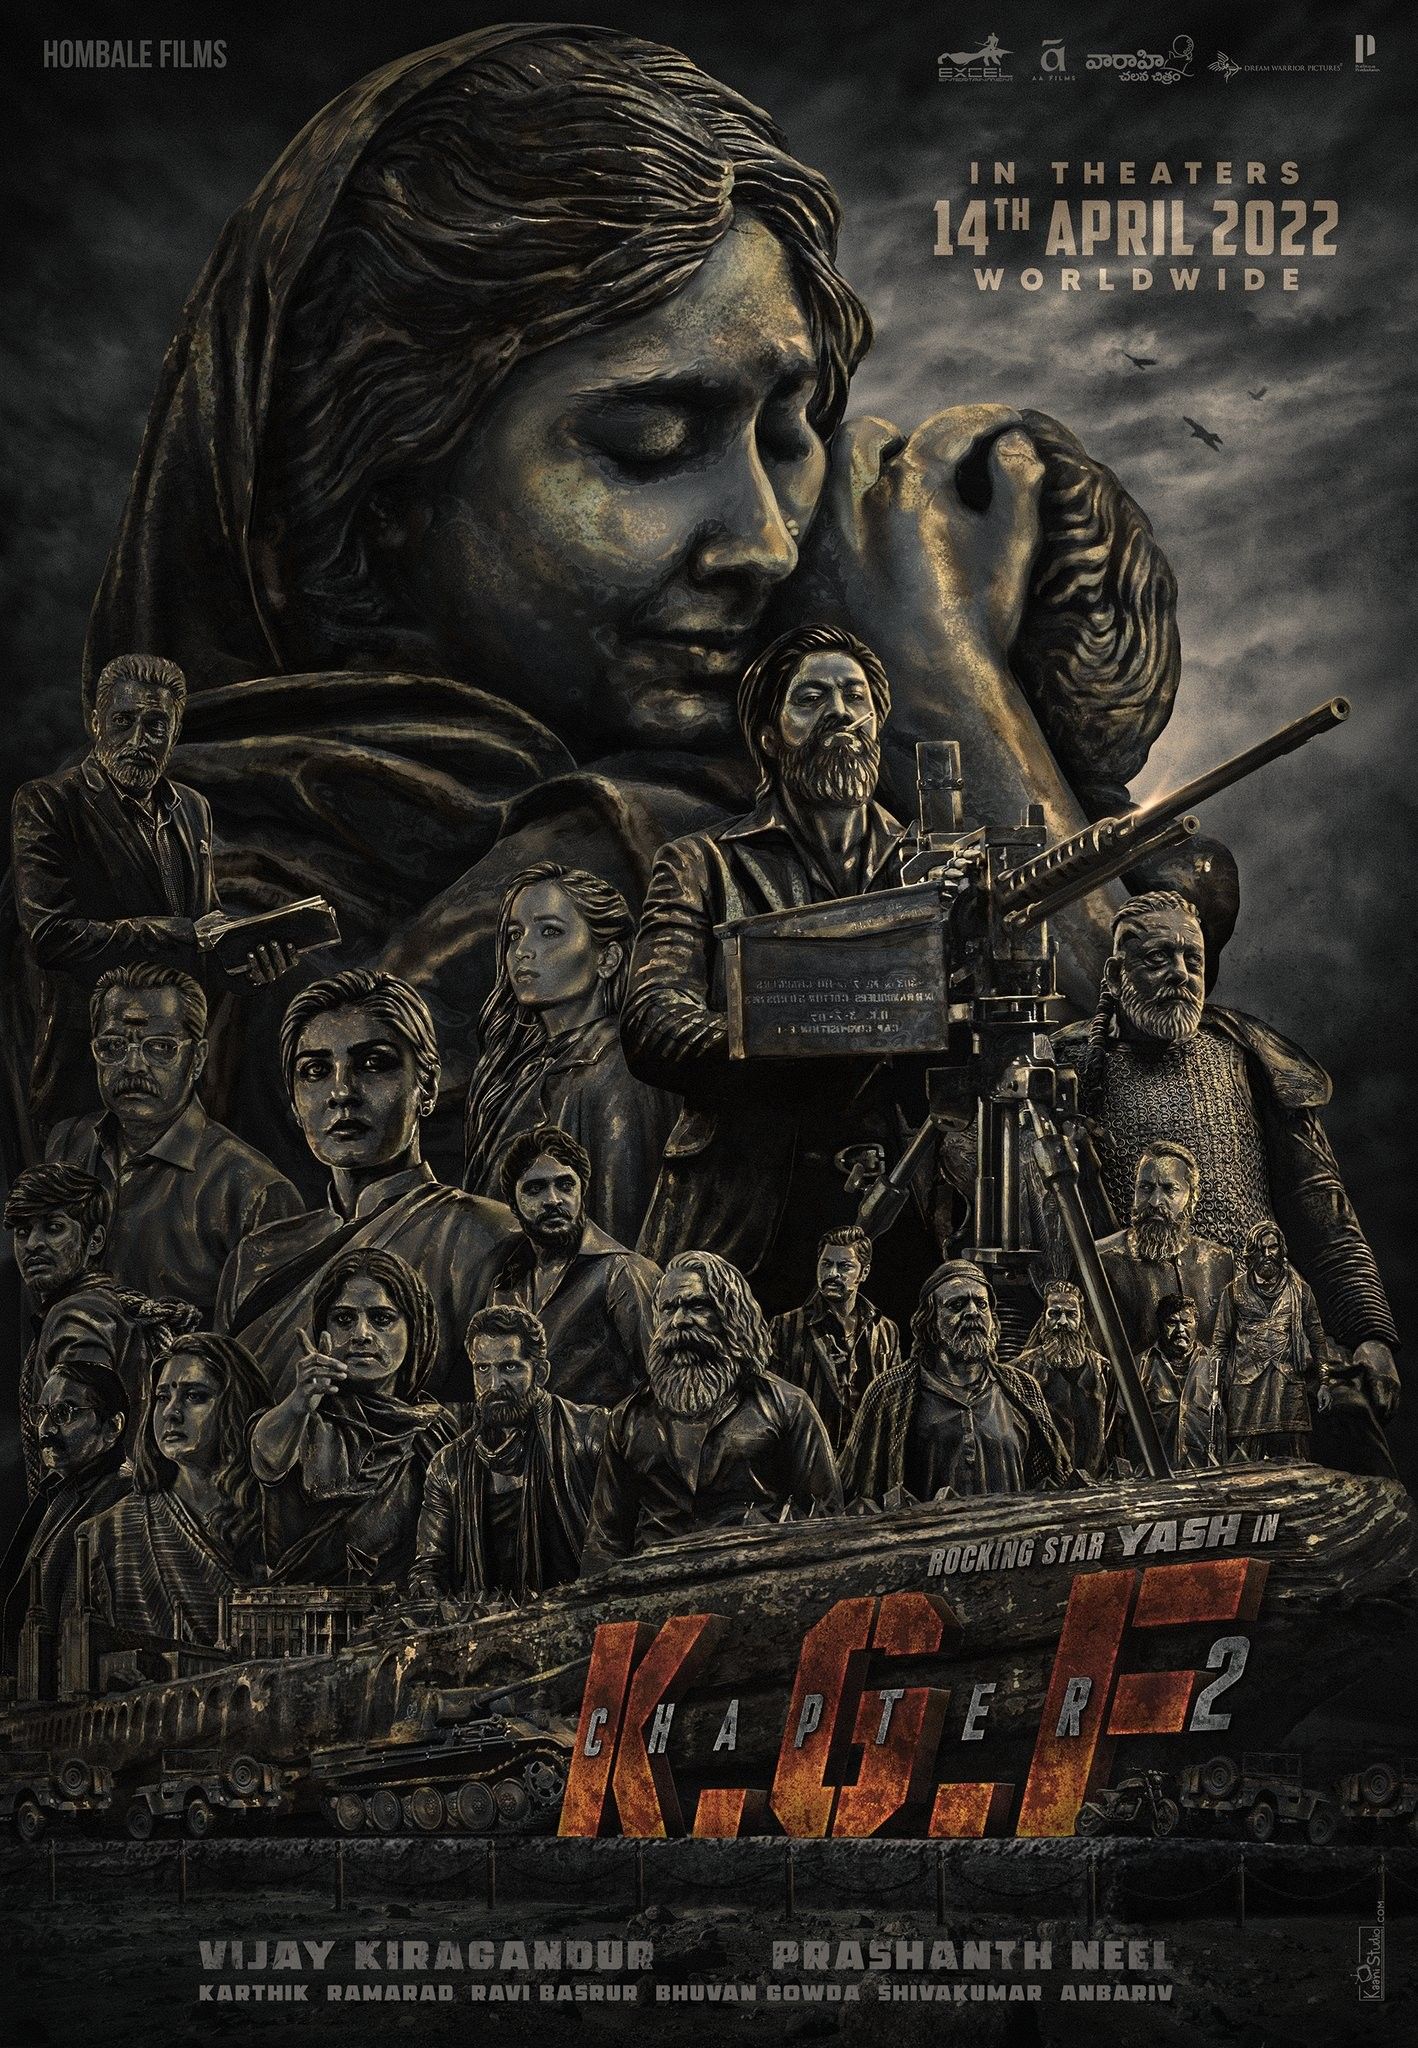 KGF Chapter 2 | KGF Chapter 2 Posters | KGF 2